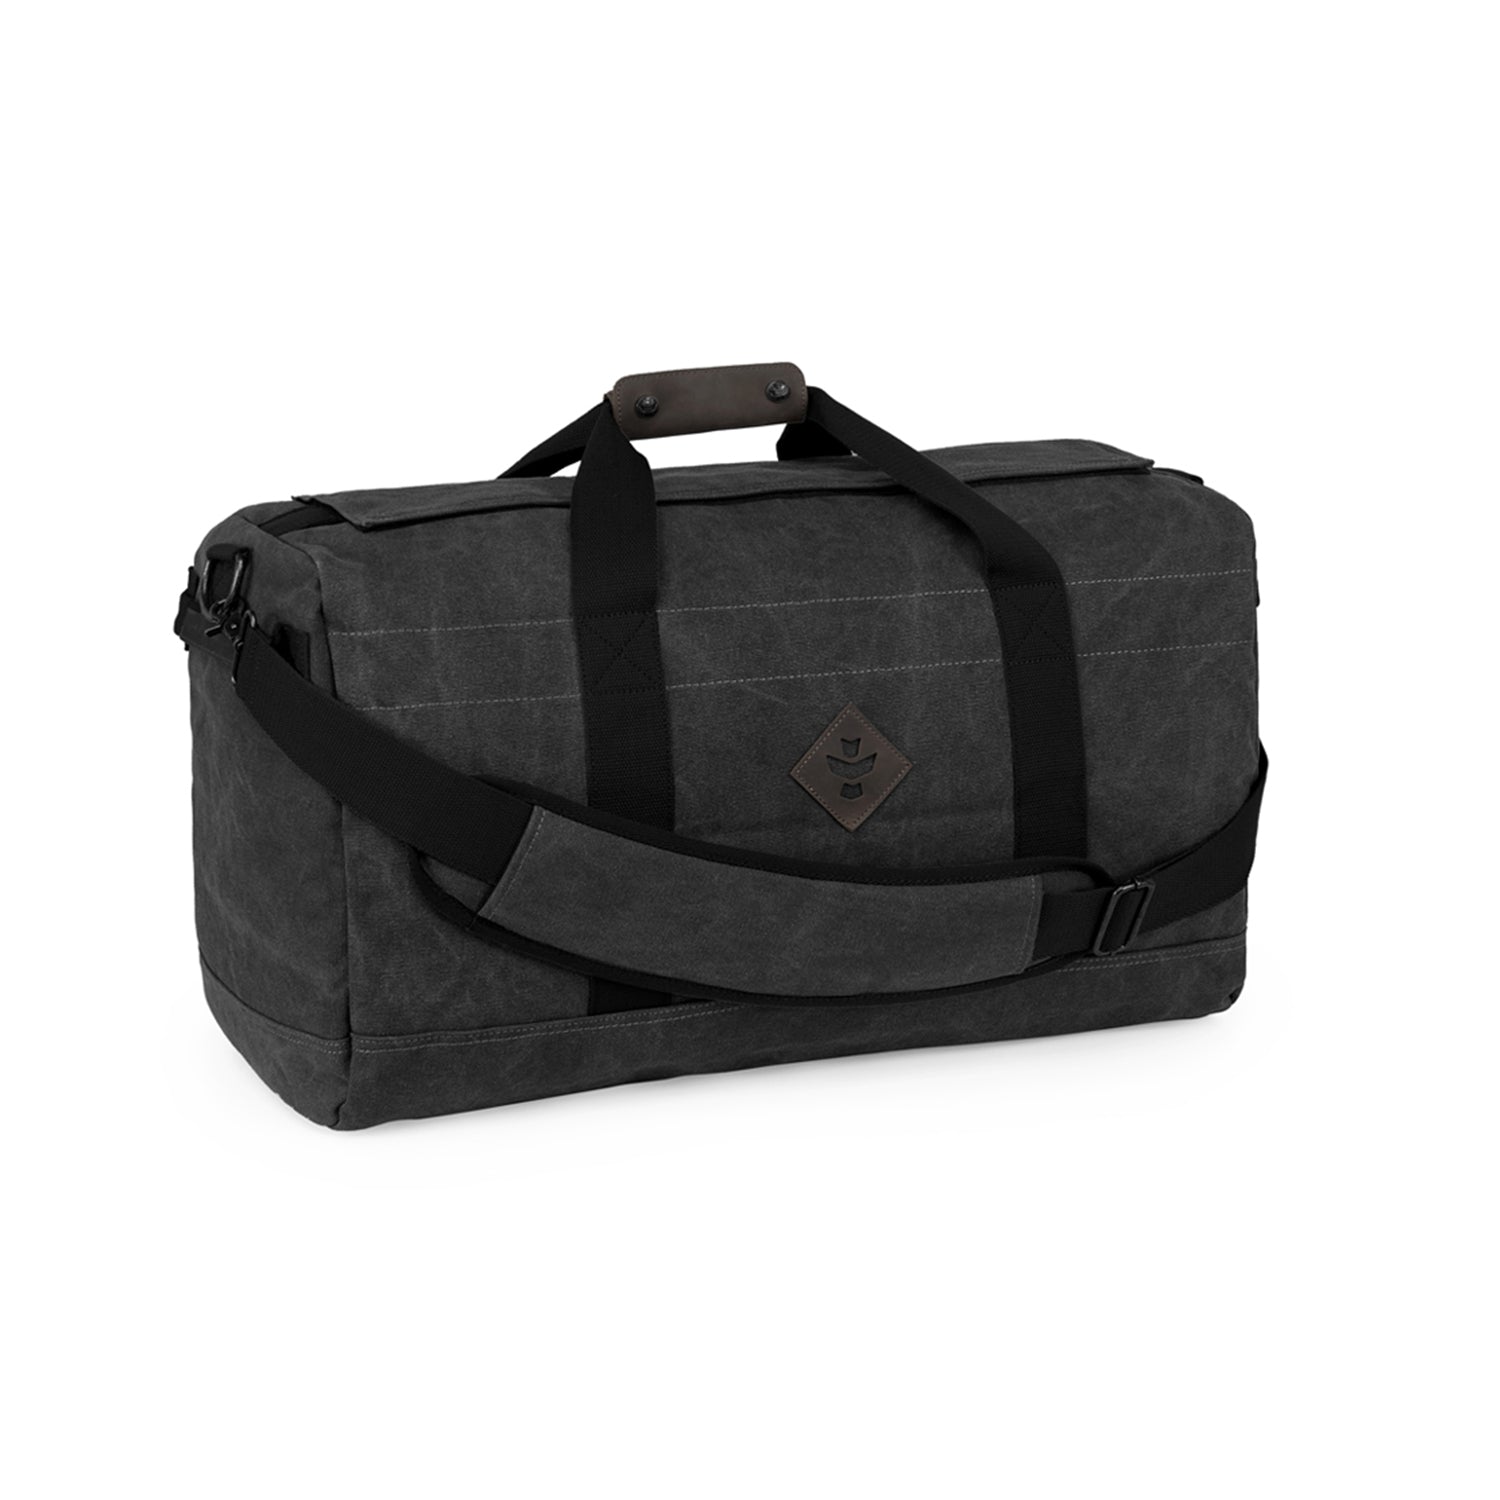 Smoke Canvas Smell Proof Water Resistant Medium Duffle Bag